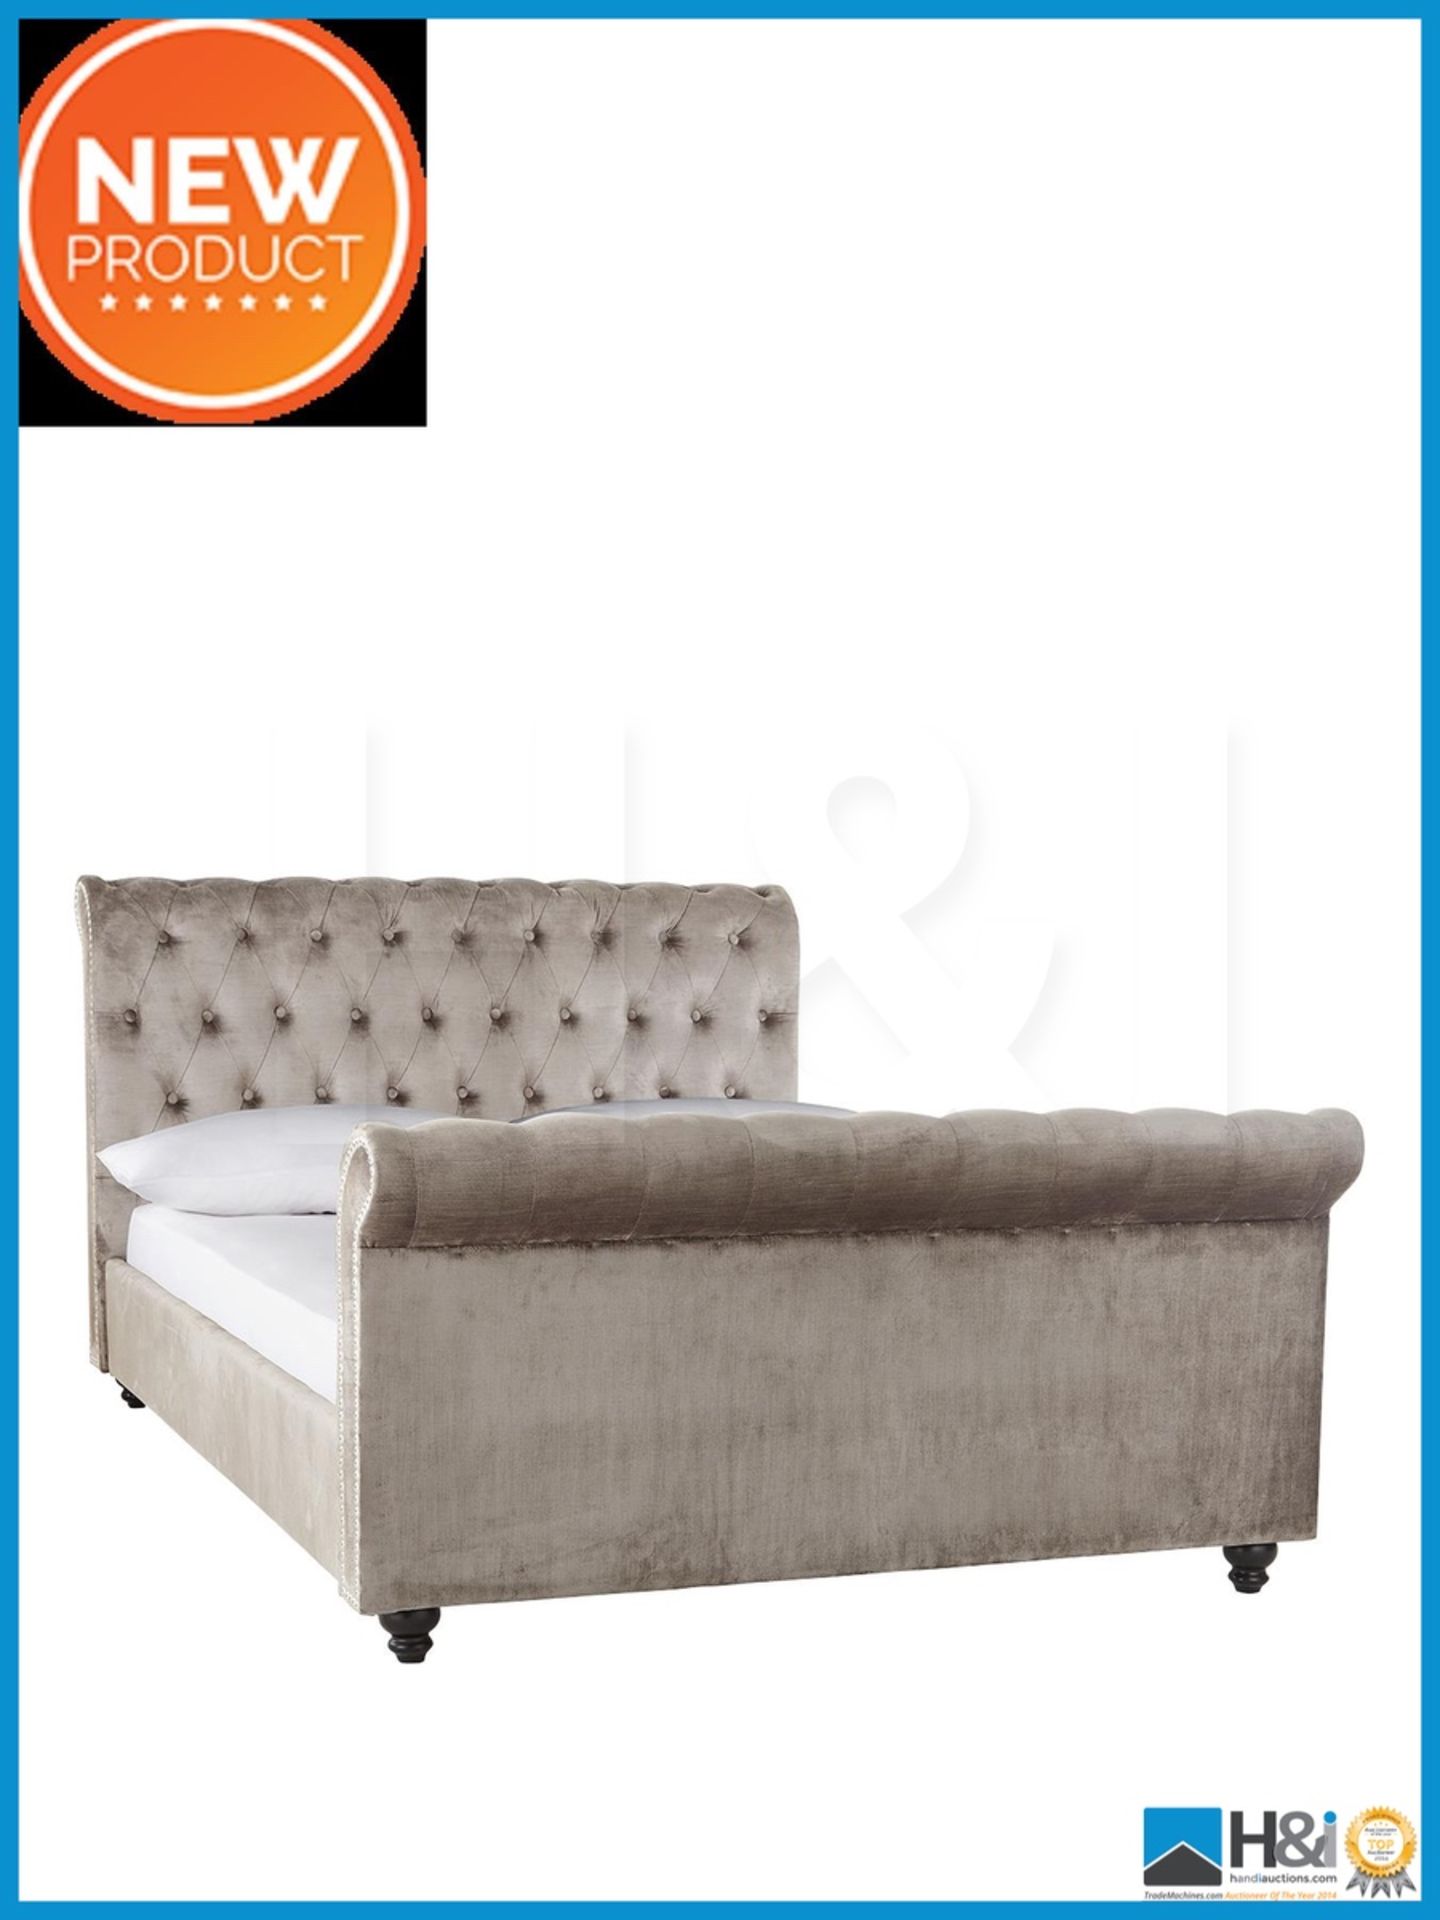 NEW IN BOX WOBURN KING BED [SILVER] 105 x 162 x 239cm RRP £1104 Appraisal: Viewing Essential